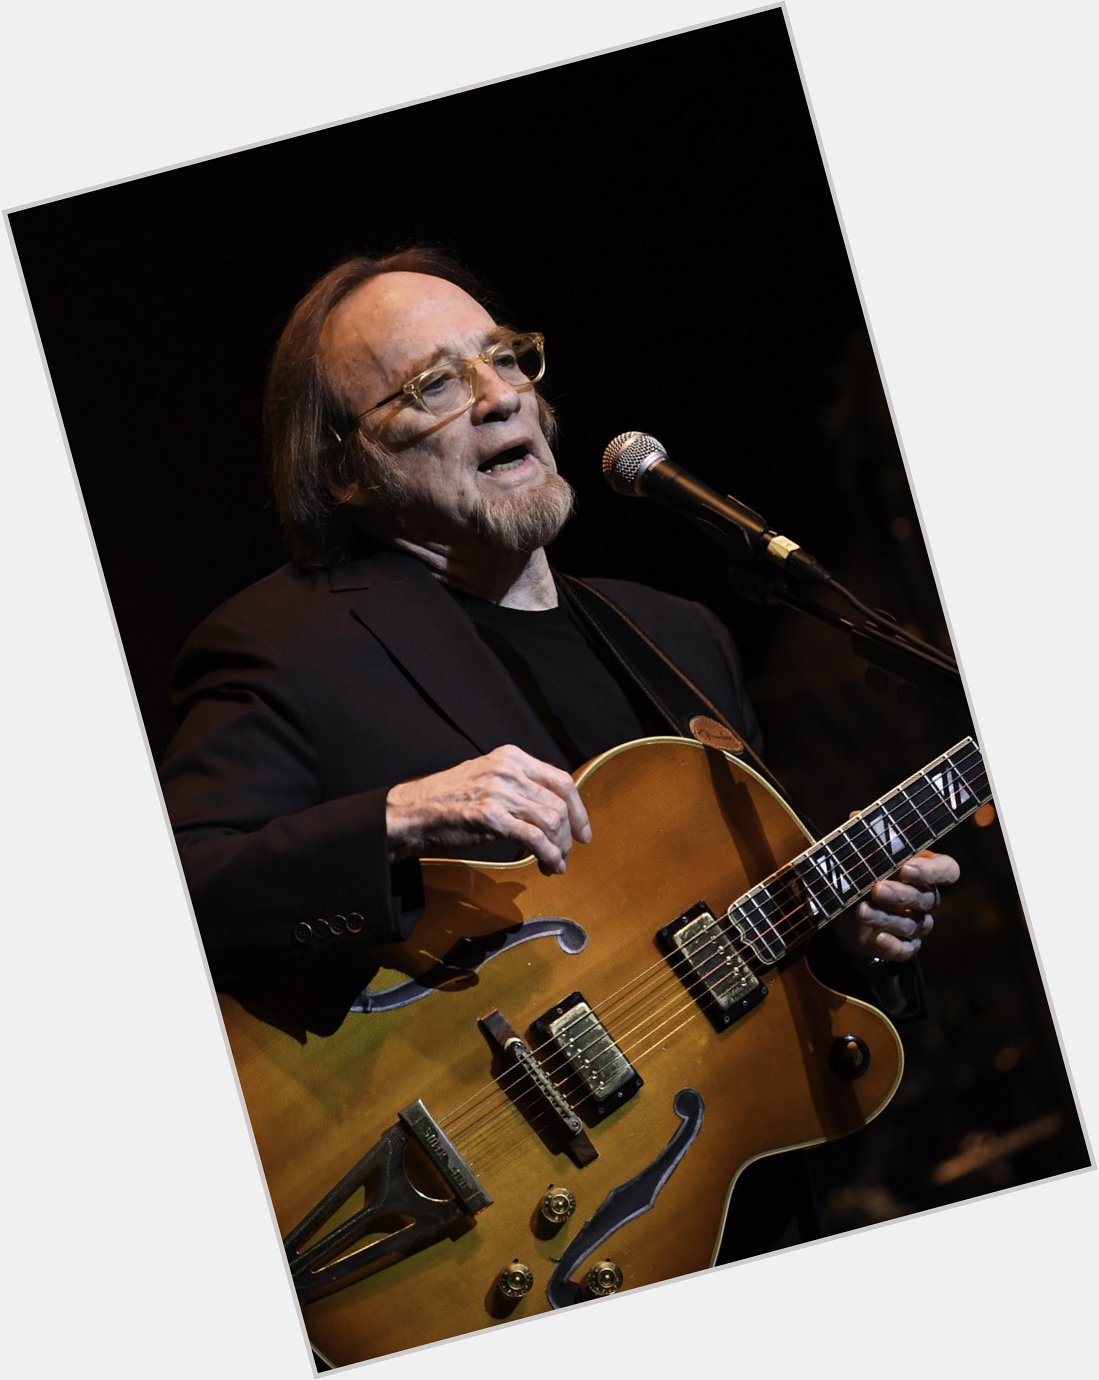 Did you know that he once auditioned for The Monkees?  Happy Birthday to Stephen Stills! 